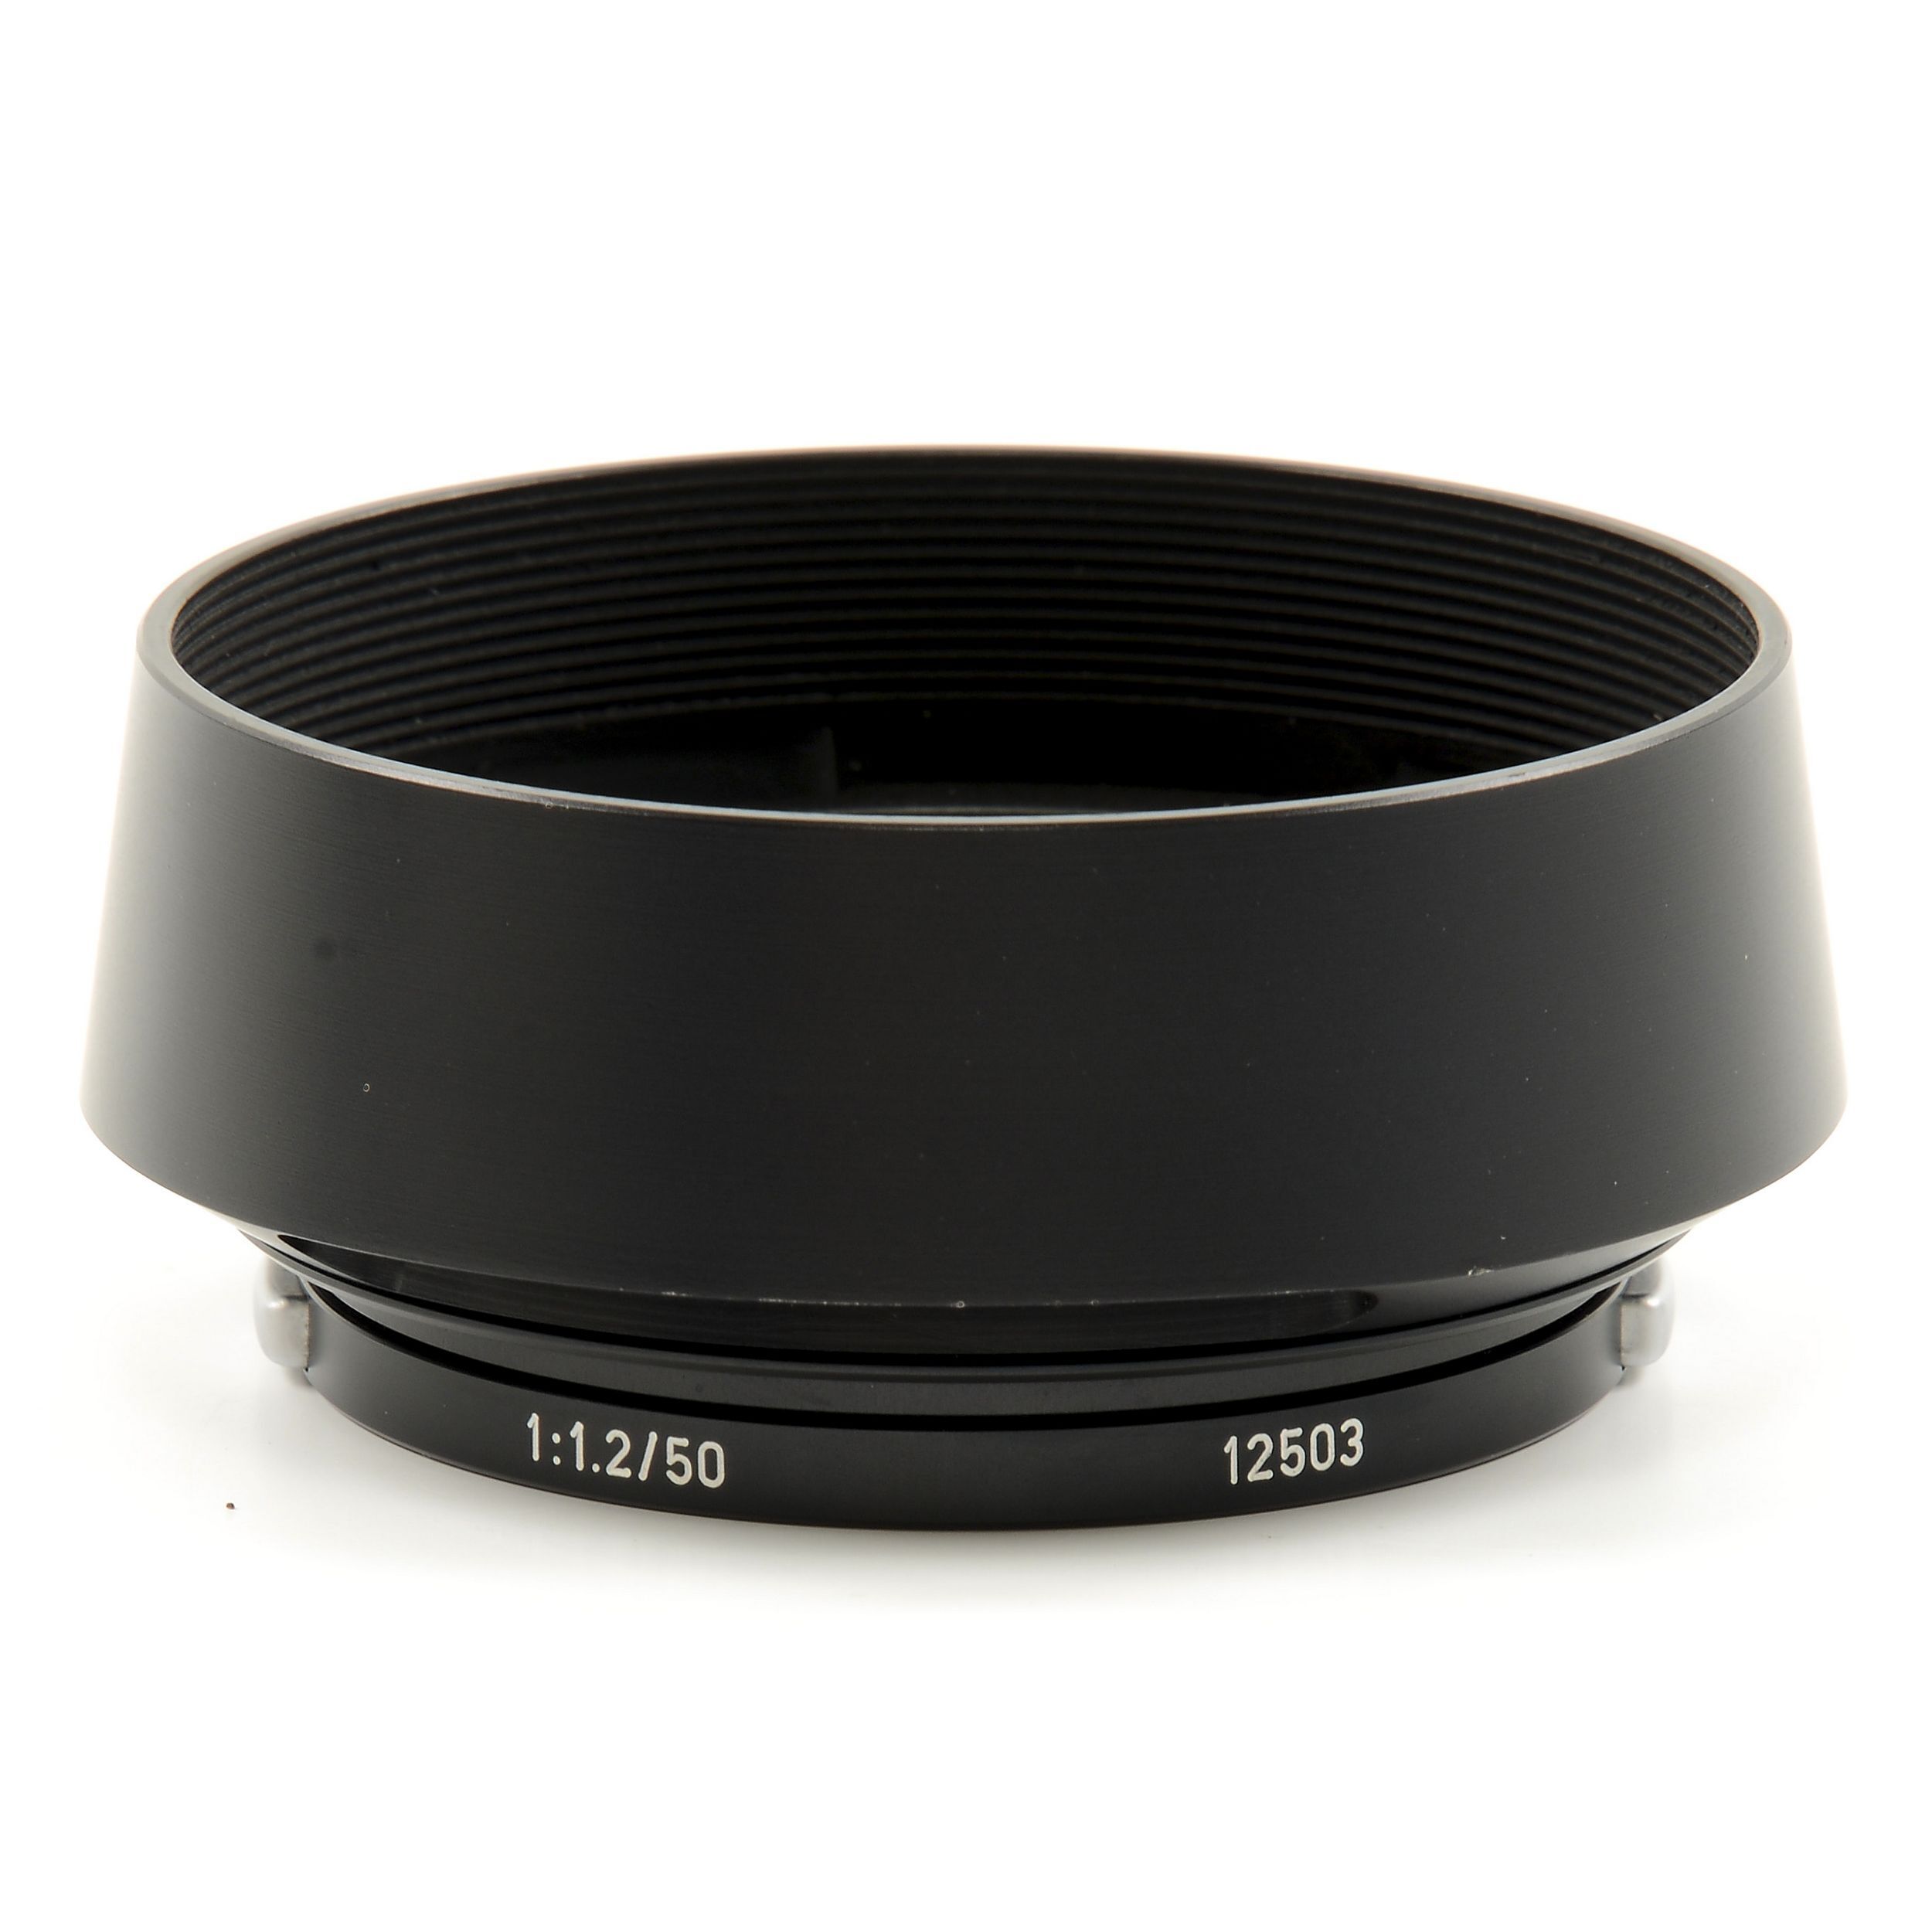 LEITZ 12503 LENS HOOD FOR NOCTILUX 50MM F1.2 VERY RARE 12503 #3349